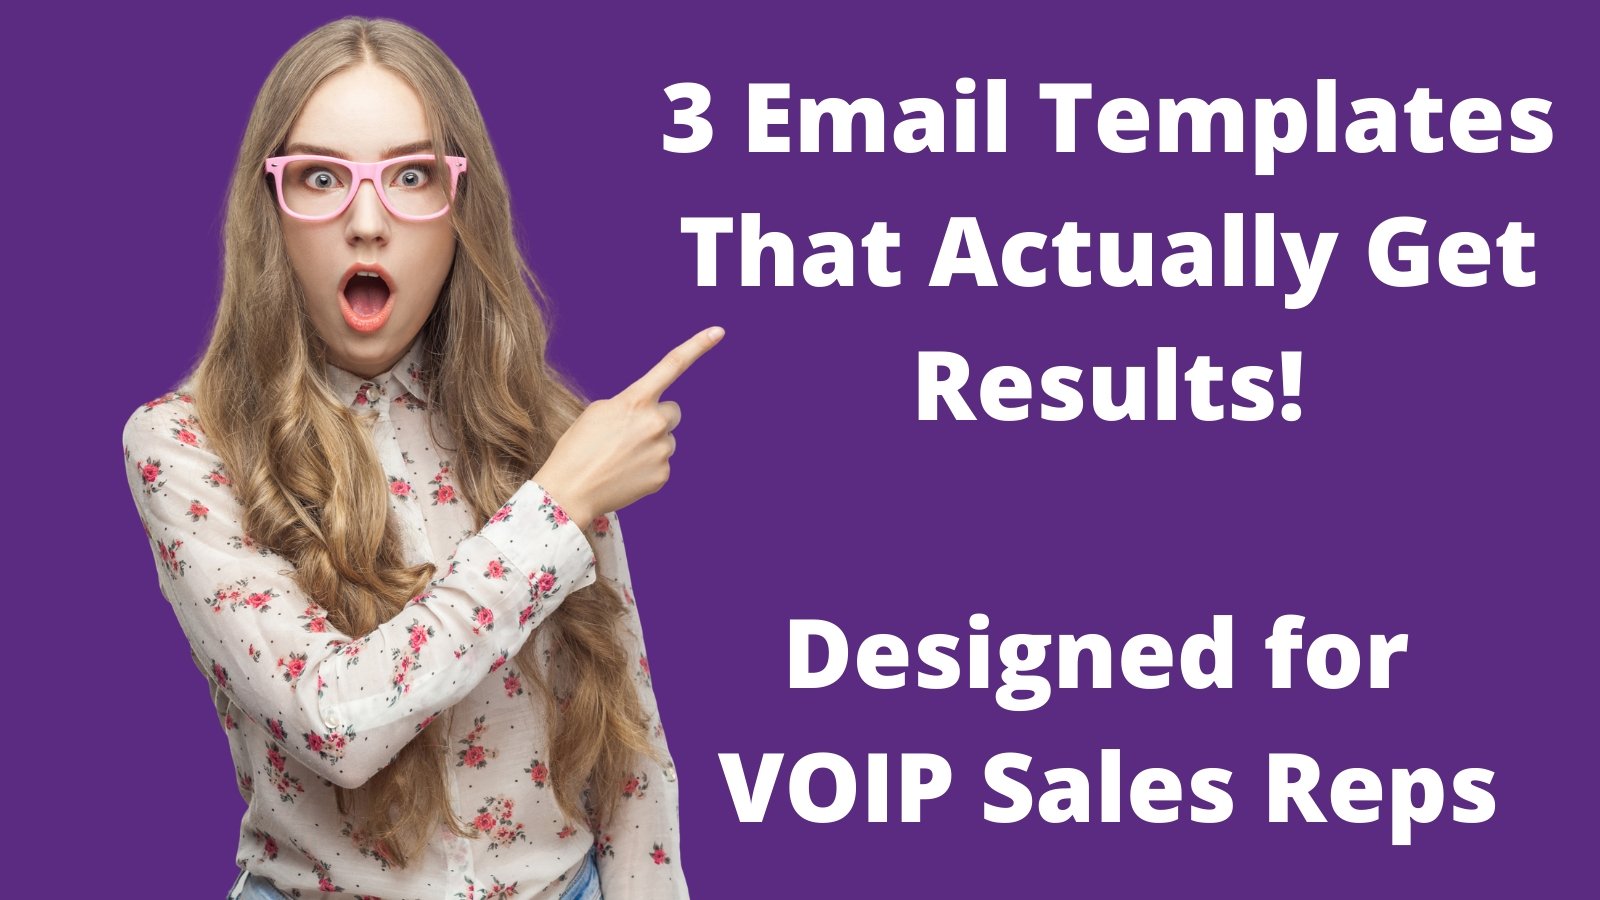 3 Best Emails For VOIP Sales Reps That Actually Get Results (Templates Included) - Headset Advisor